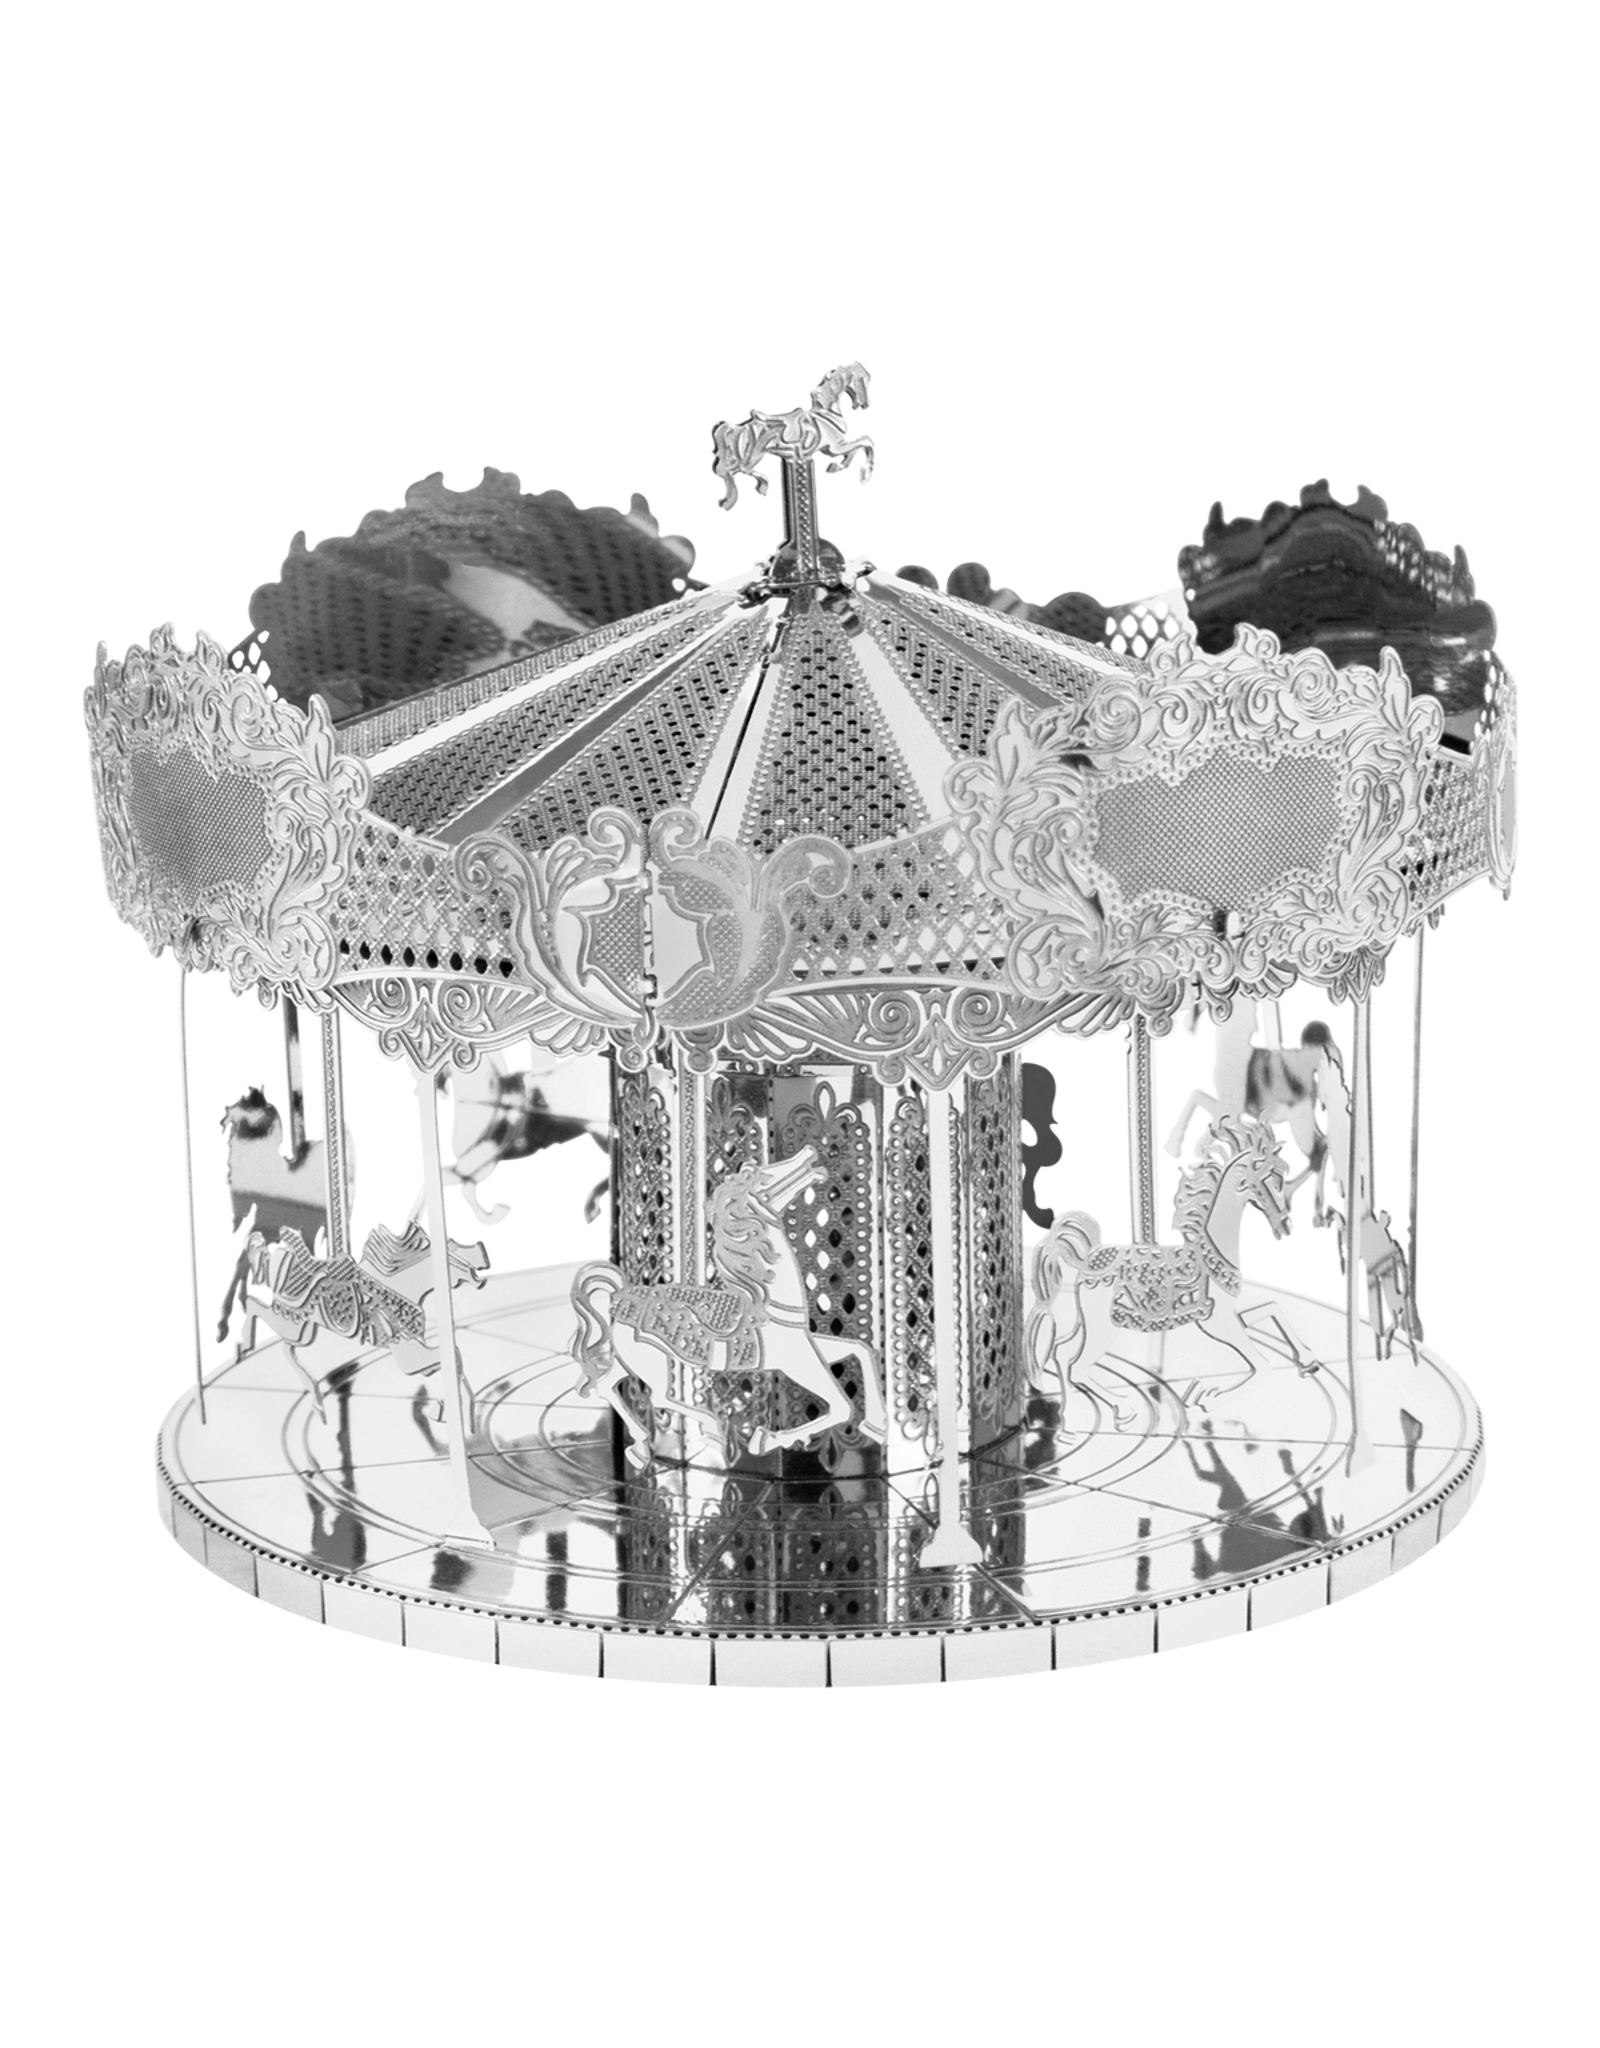 Metal Earth Merry Go Round